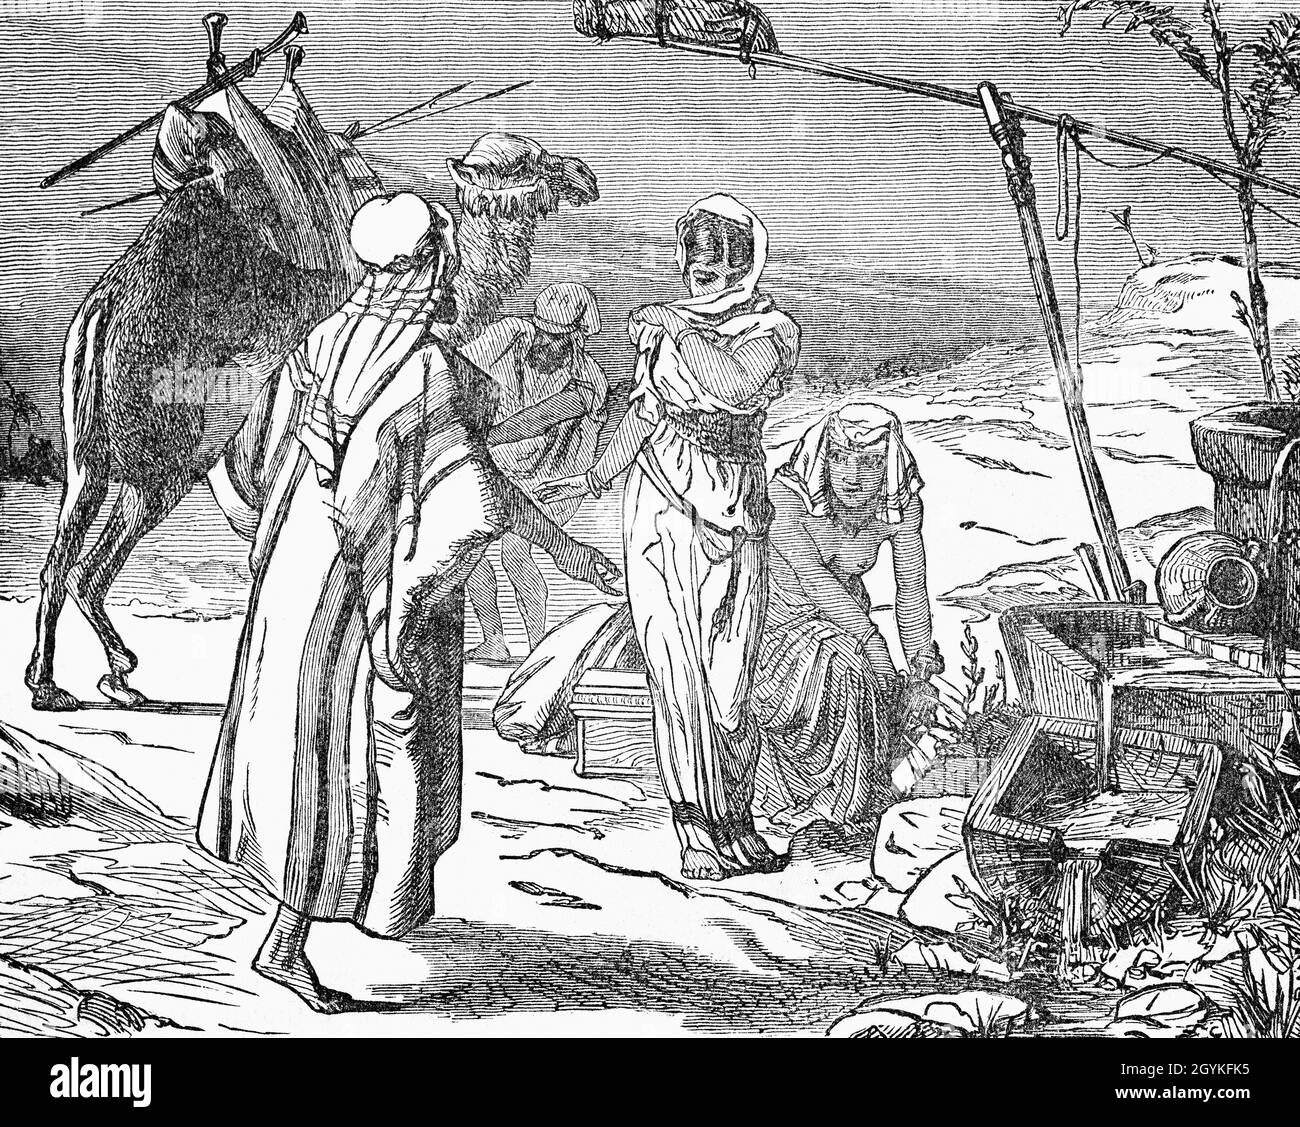 A late 19th Century illustration from the Book of Genesis of the meeting of the servant of Isaac, the son of Abraham and Sarah, and Rebekah, beautiful and from a good family.  Isaac and Rebekah would later marry and have two sons- Esau, father of the Edomites and the Amalekites, and Jacob, who would later be called Israel. Stock Photo